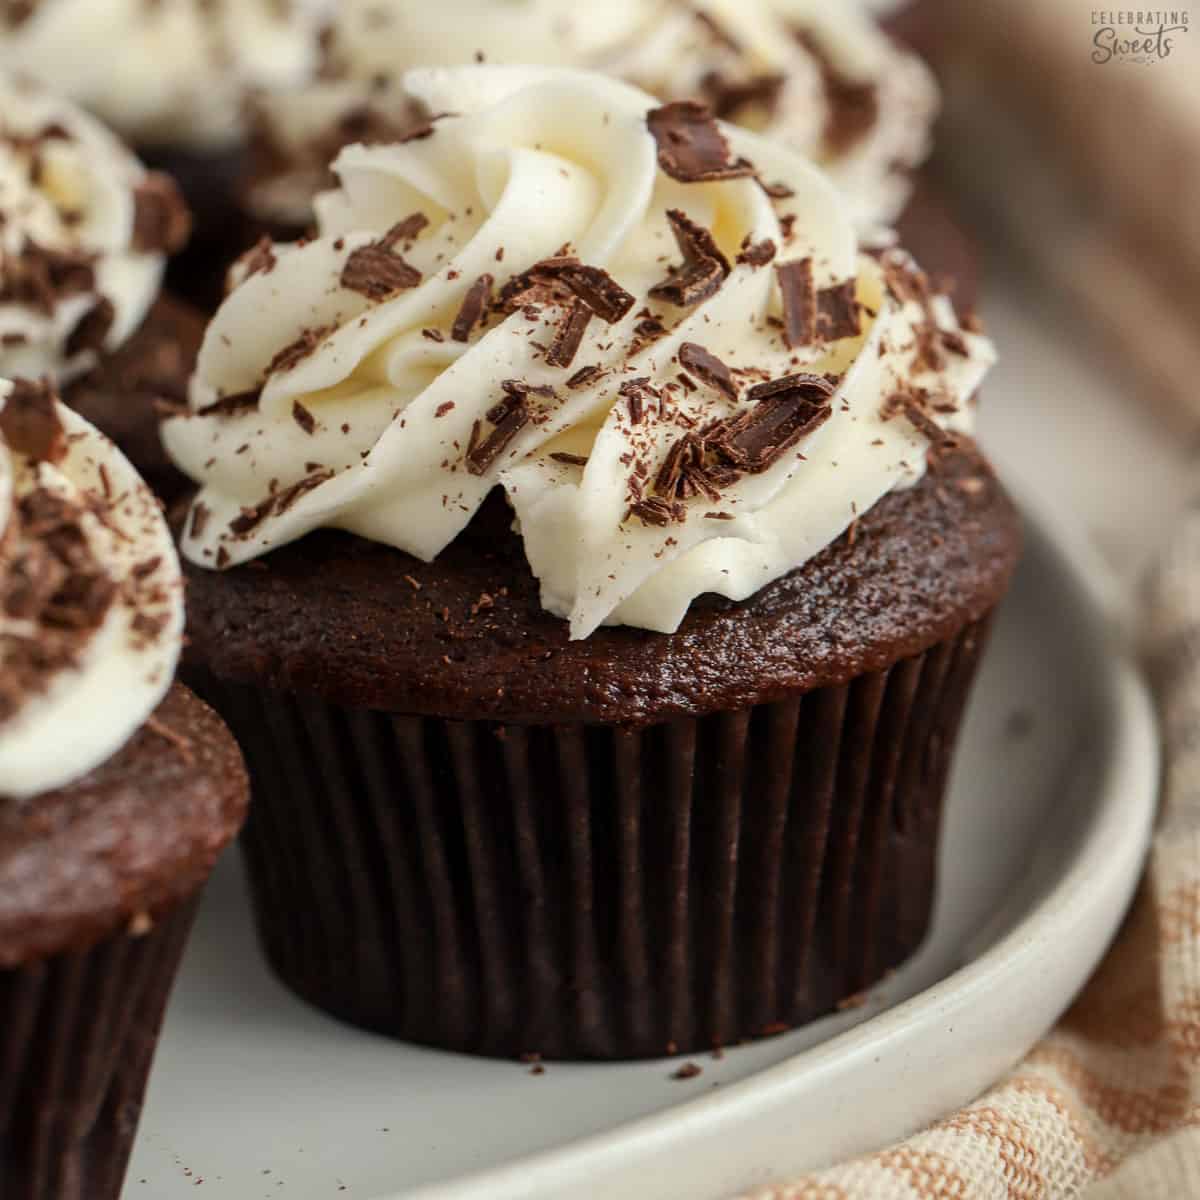 https://celebratingsweets.com/wp-content/uploads/2023/02/Small-Batch-Chocolate-Cupcakes-9.jpg